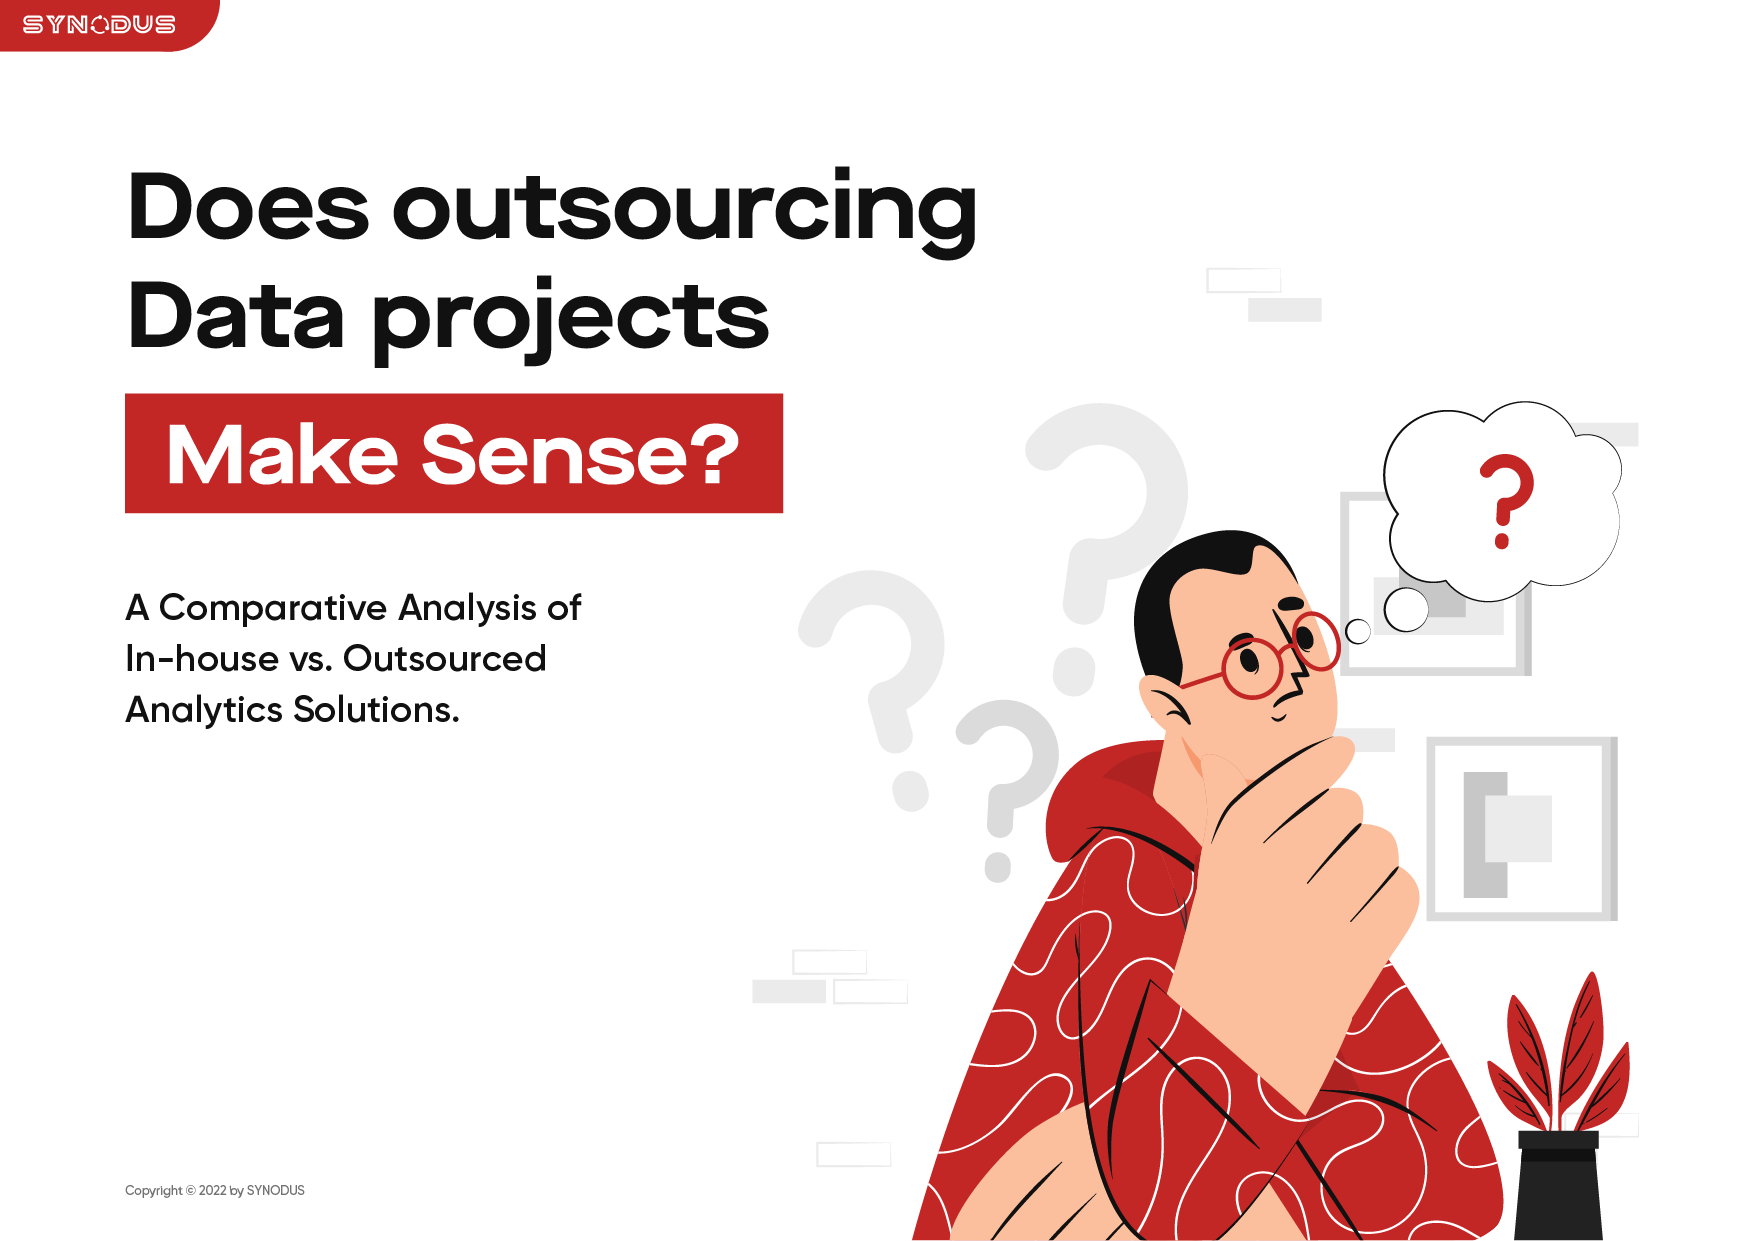 Does Outsourcing Data Projects Make Sense?